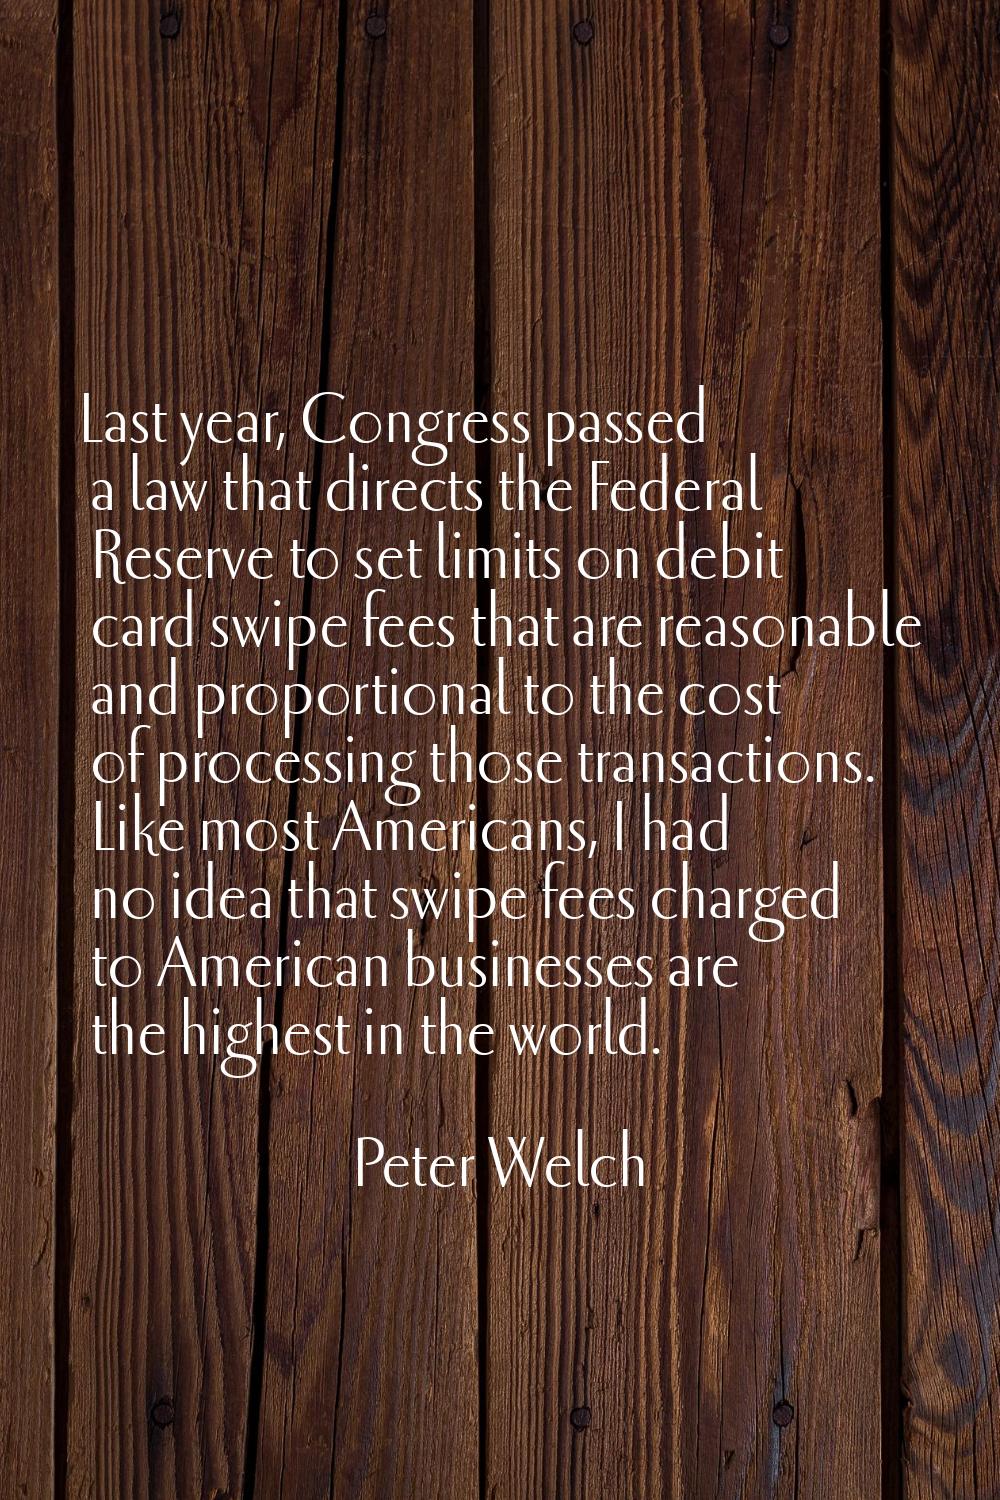 Last year, Congress passed a law that directs the Federal Reserve to set limits on debit card swipe